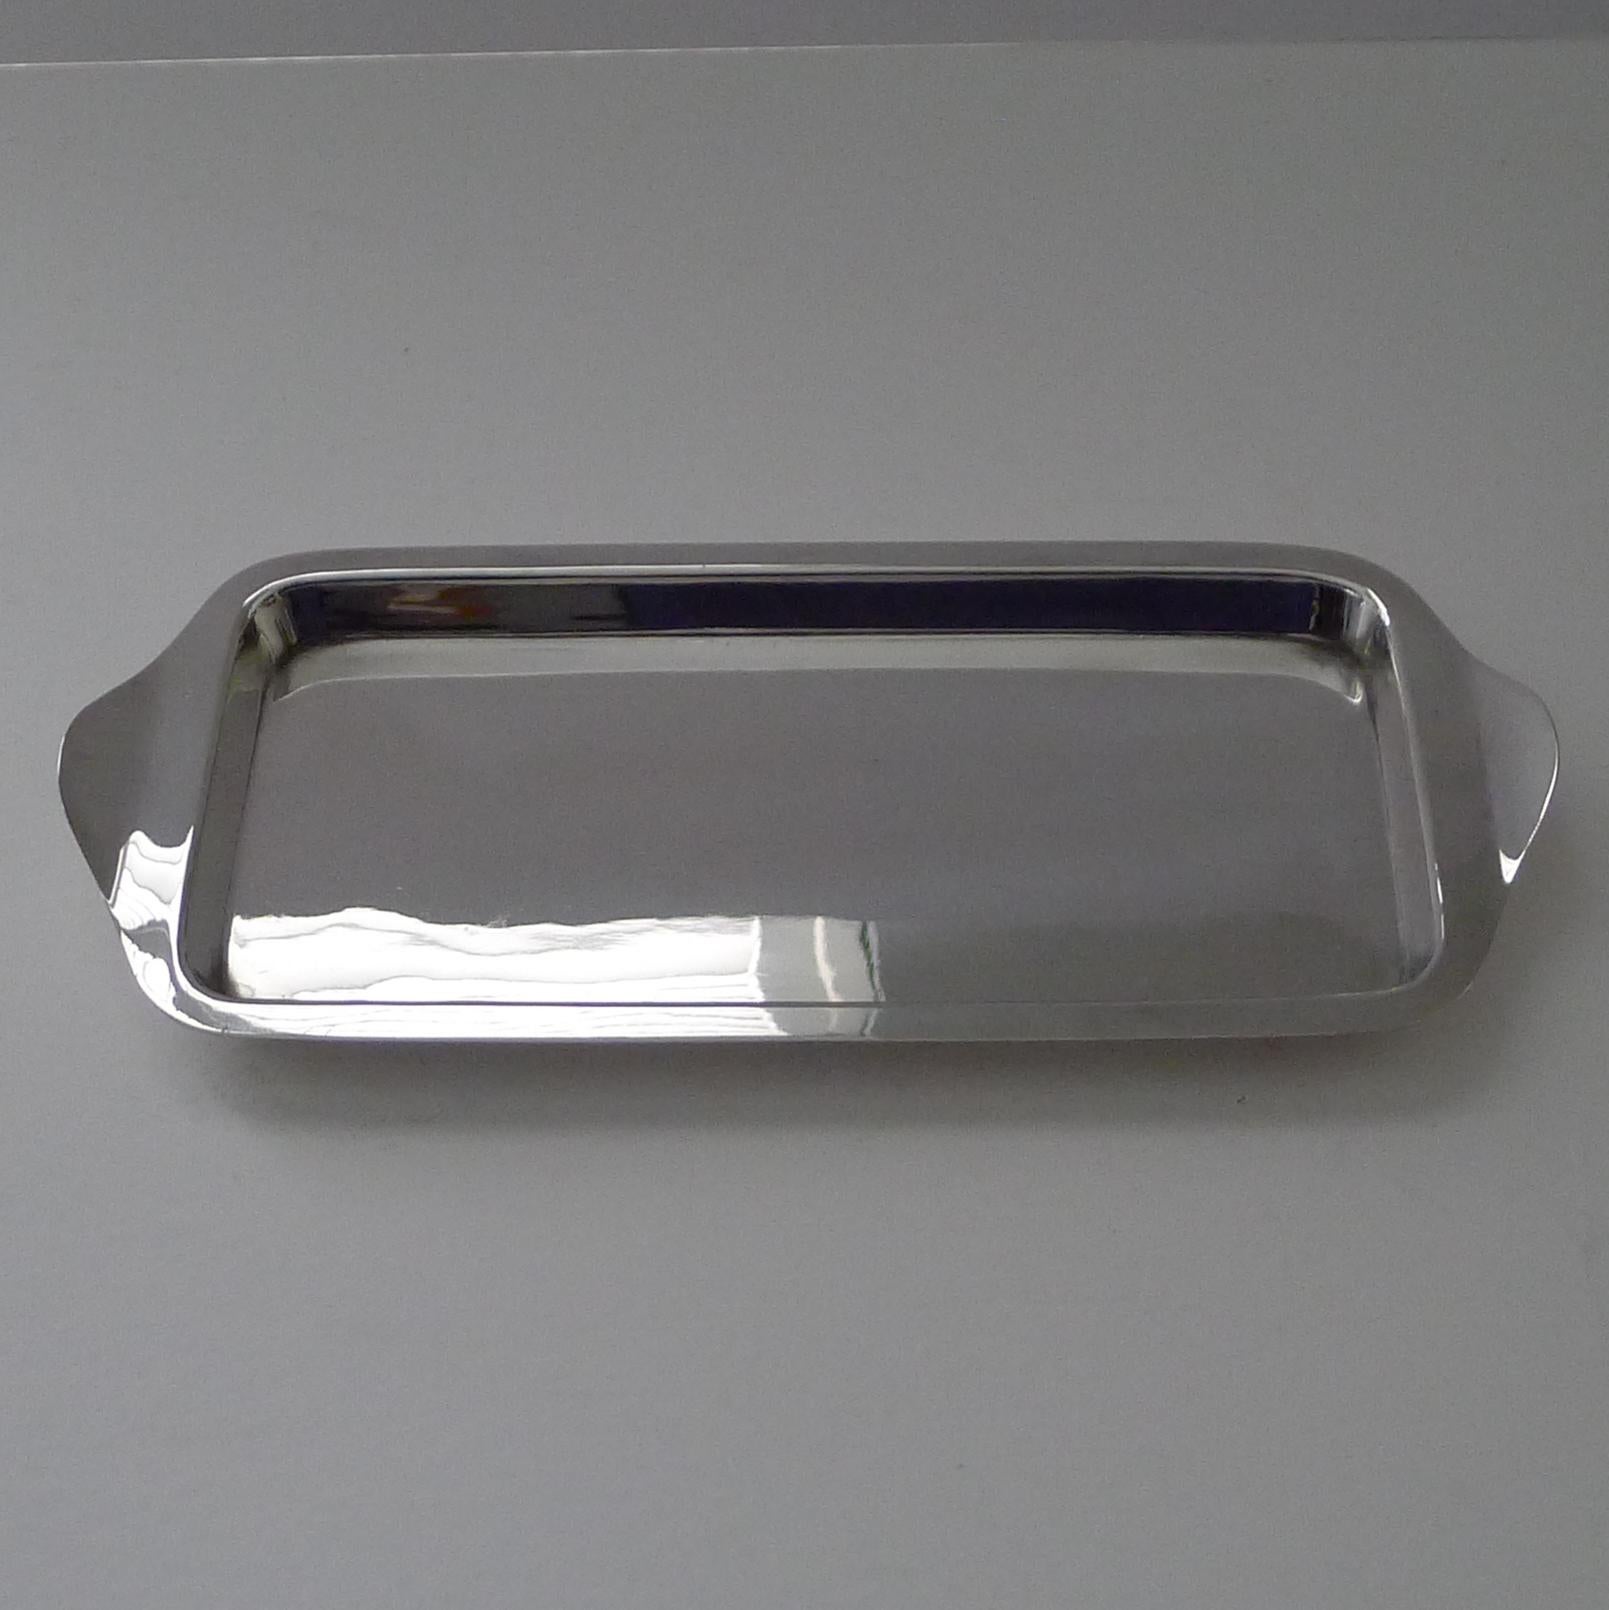 British Asprey, London, Small Silver Plated Cocktail Tray c.1910